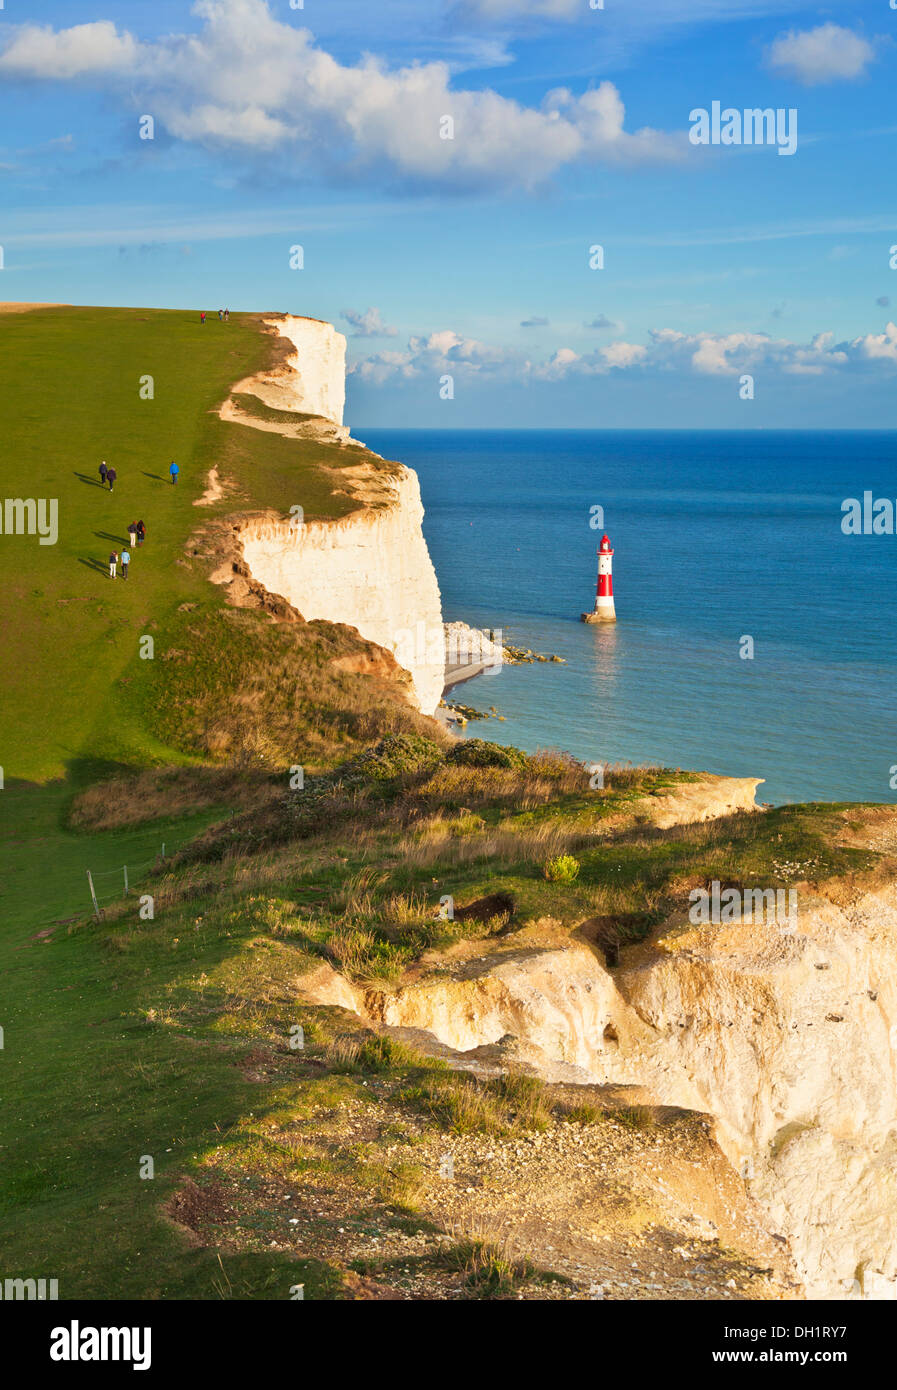 Beachy Head Lighthouse sotto sette sorelle chalk cliffs South Downs way national park East Sussex England Regno unito Gb eu europe Foto Stock